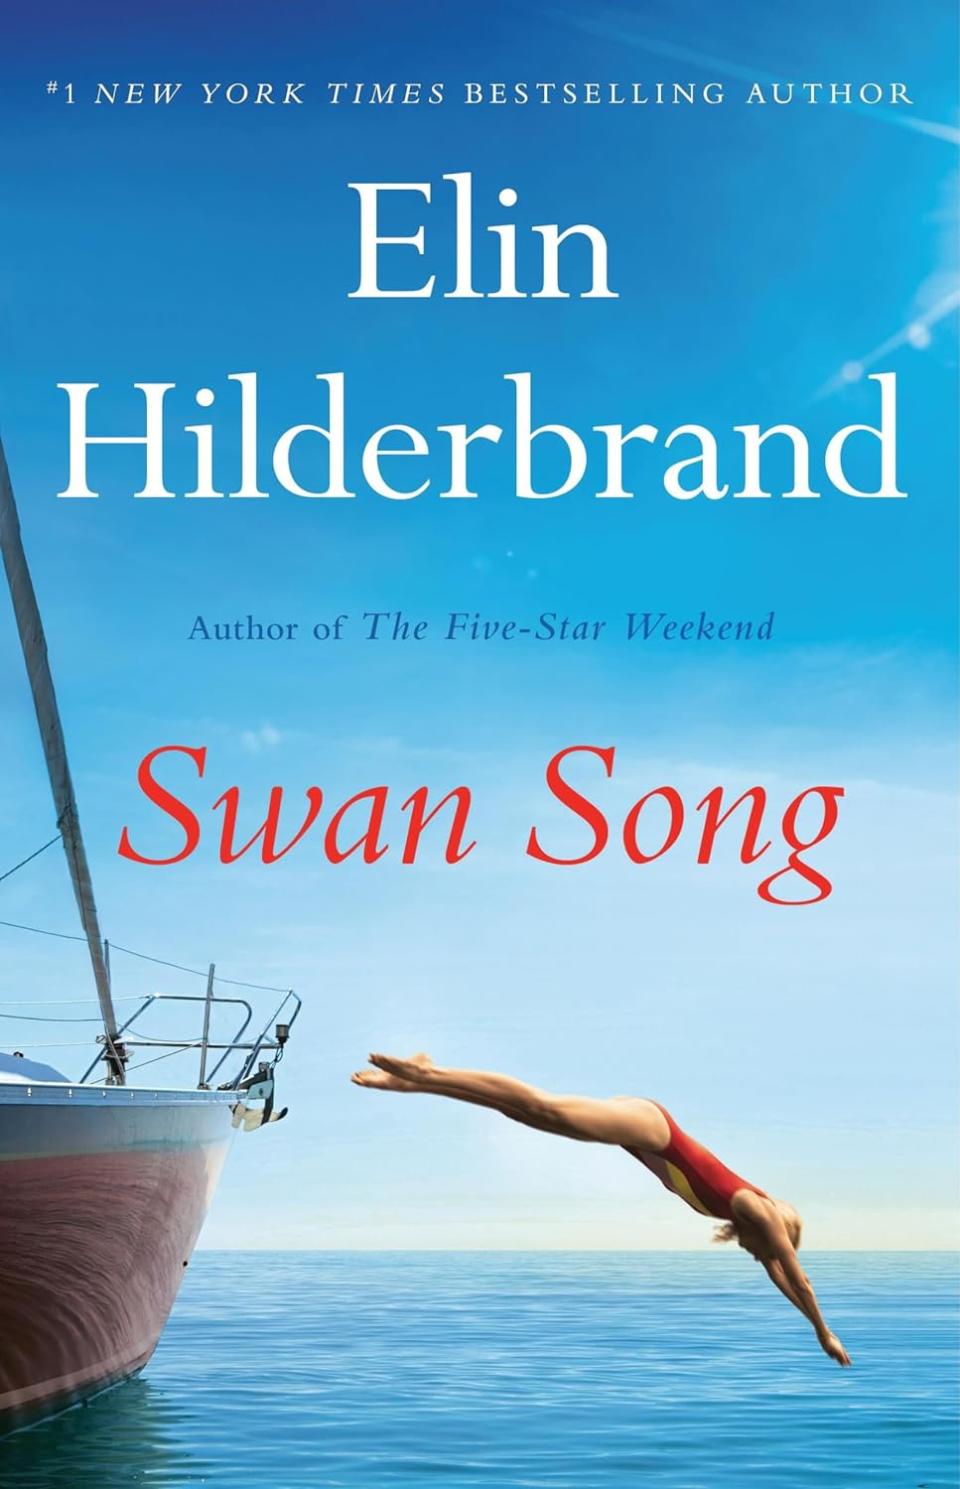 Swan Song by Elin Hilderbrand (New book releases) 